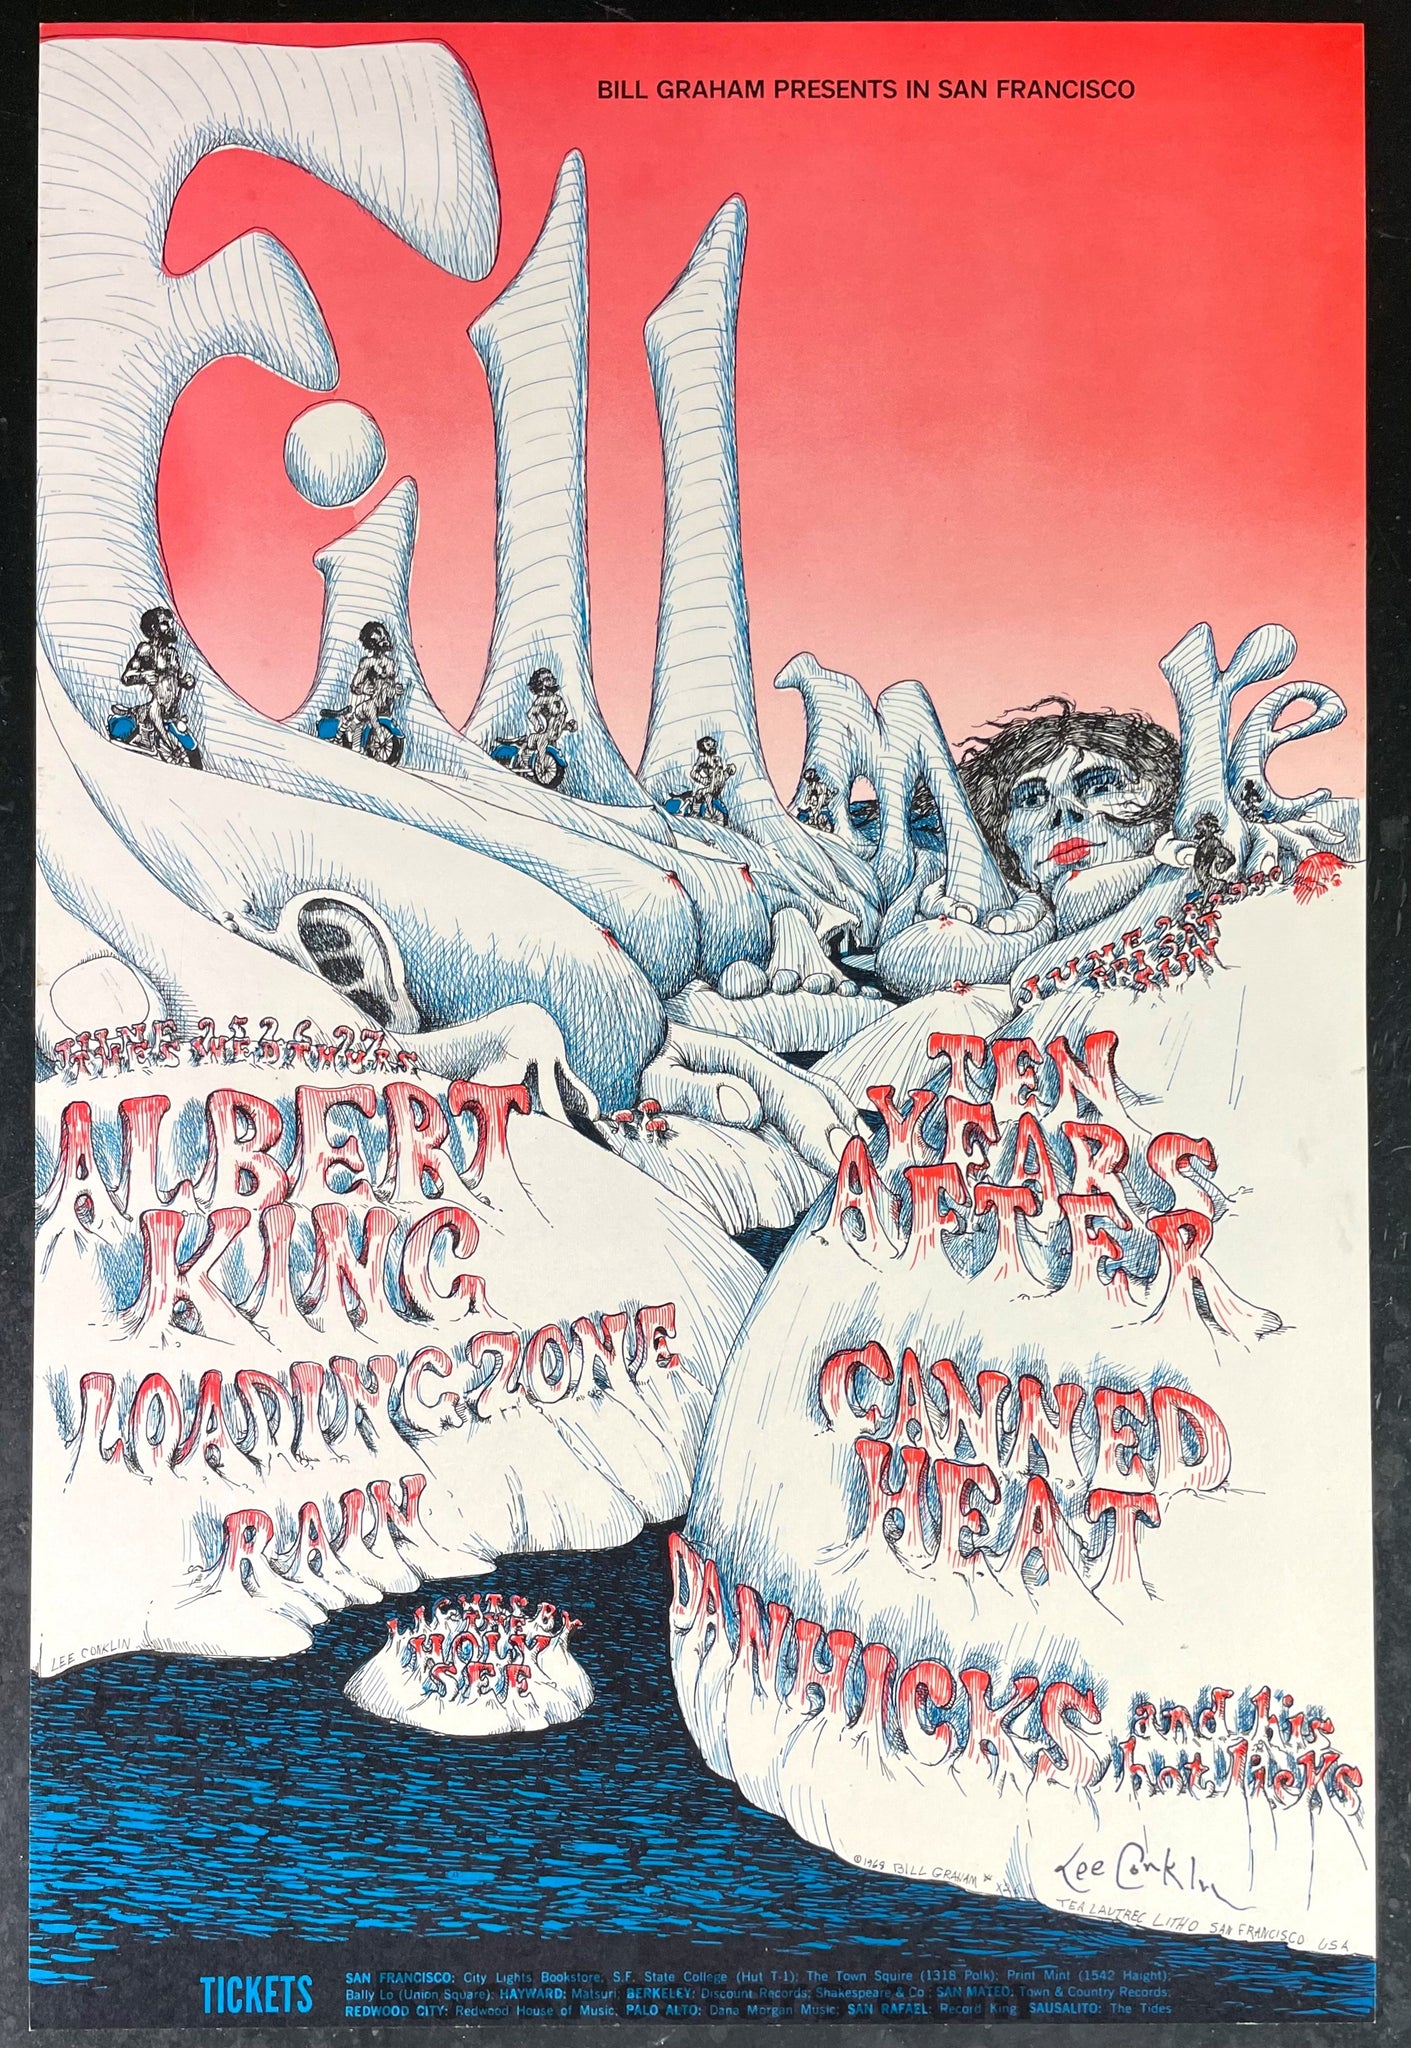 AUCTION - BG-126 - Ten Years After Albert King - Lee Conklin Signed - 1967 Poster - Fillmore Auditorium - Near Mint Minus